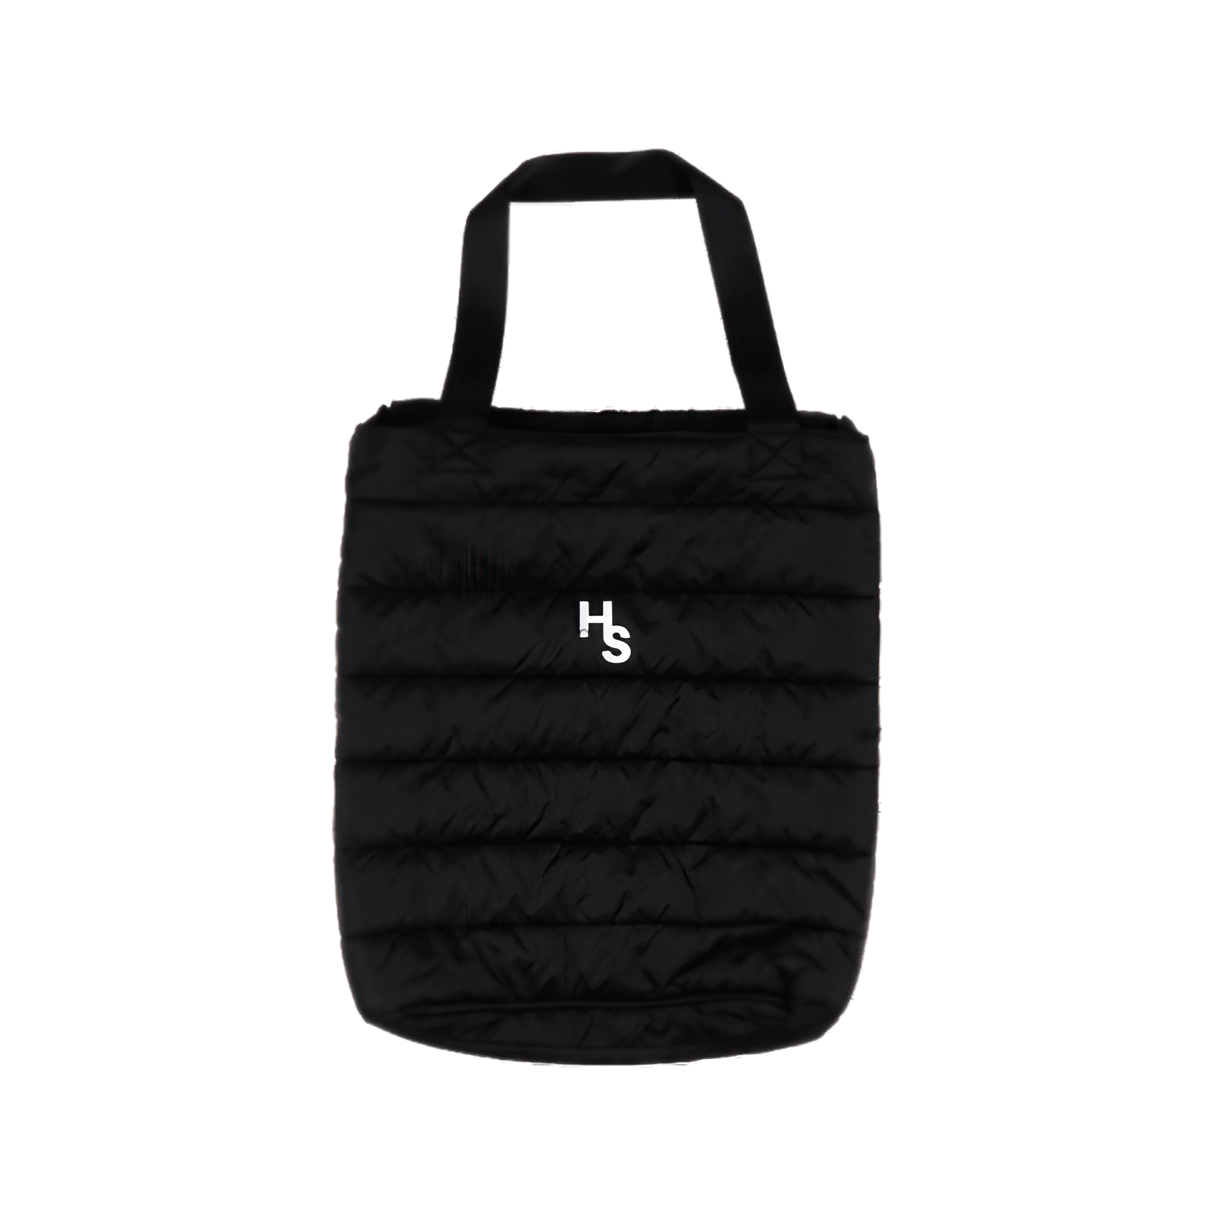 Higher Standards black quilted tote bag with white logo, front view on a seamless white background